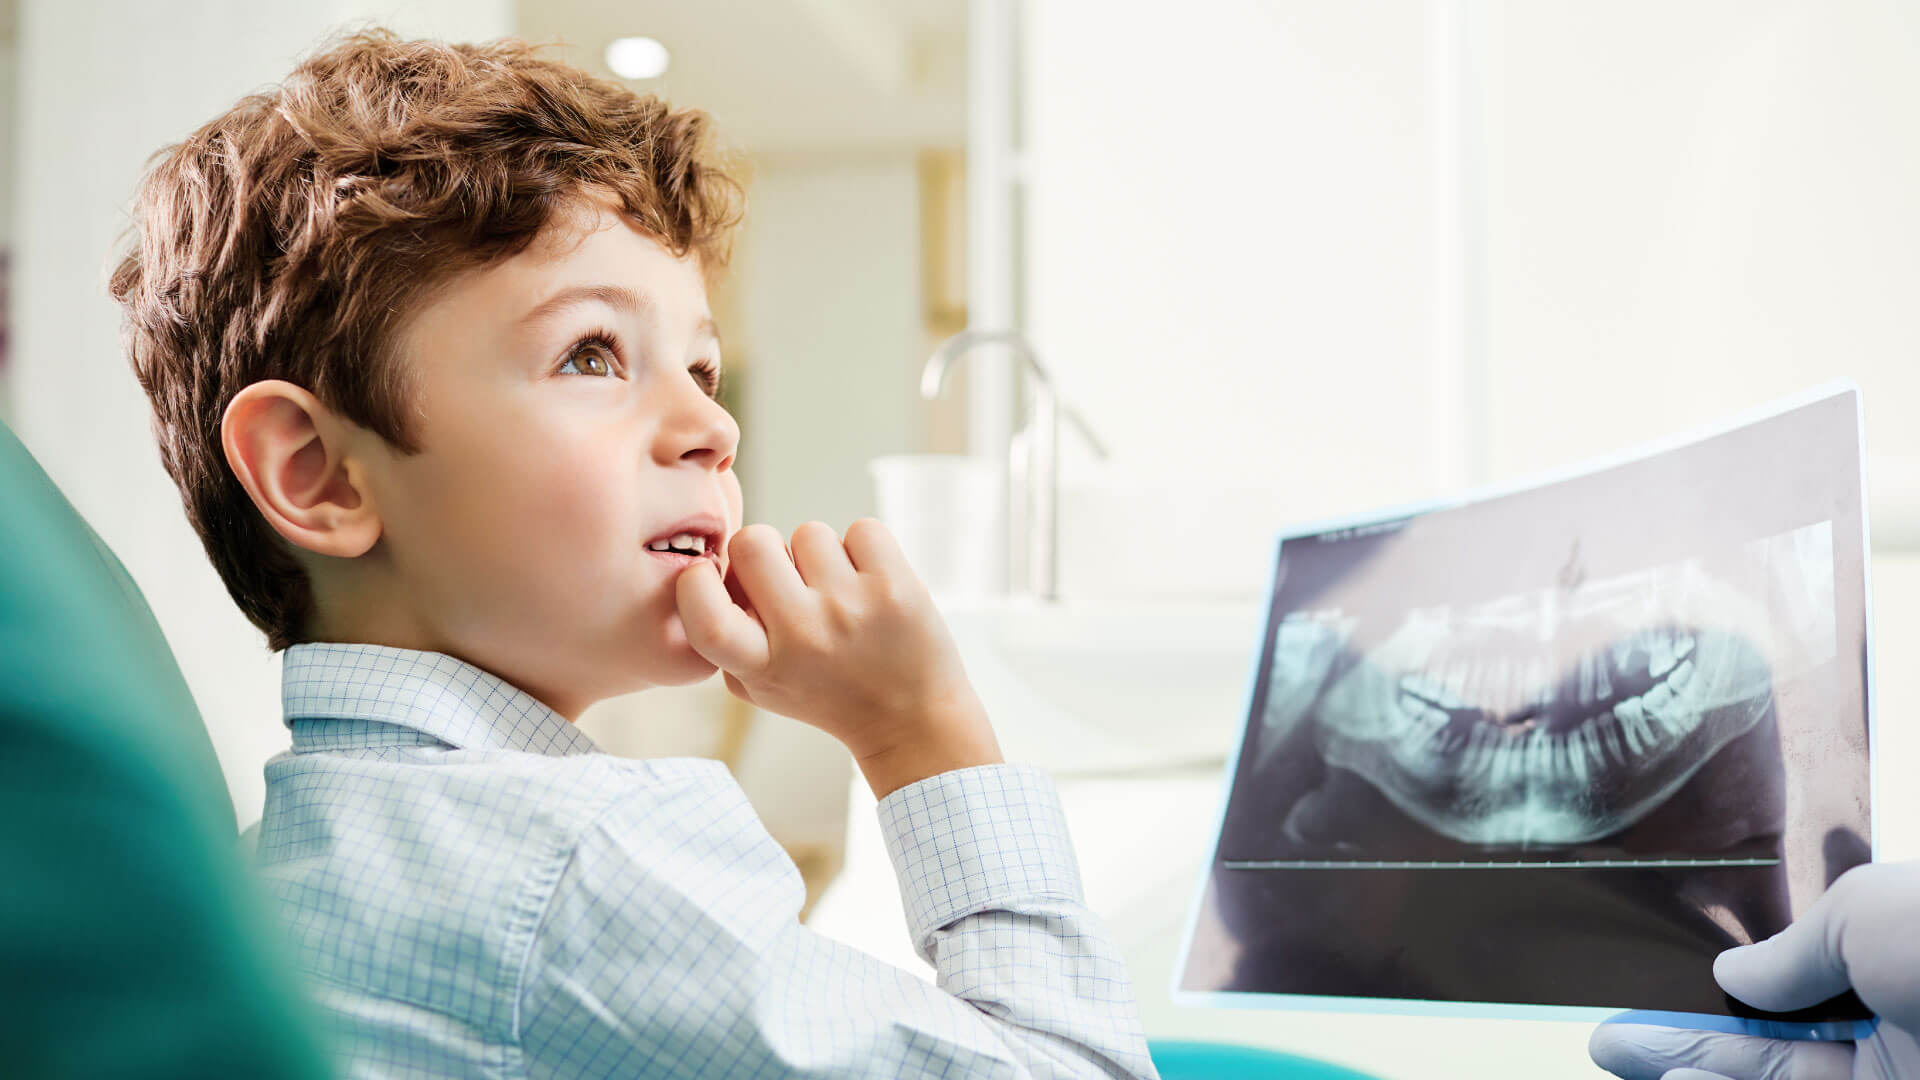 Early intervention orthodontic care at Pediatric Smiles